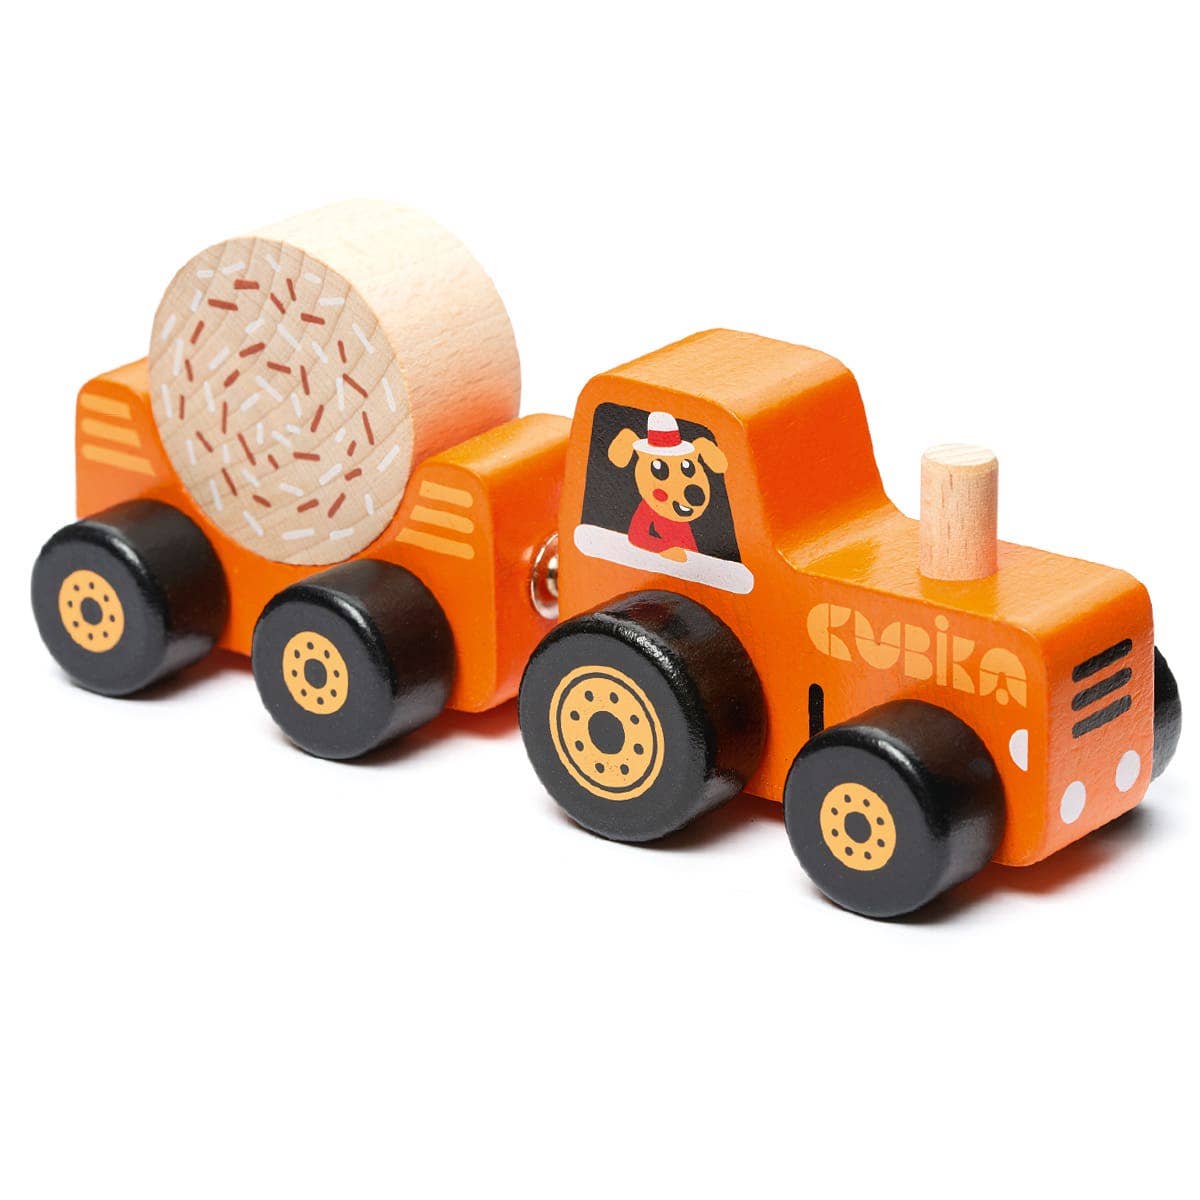 Wooden toy "Tractor"